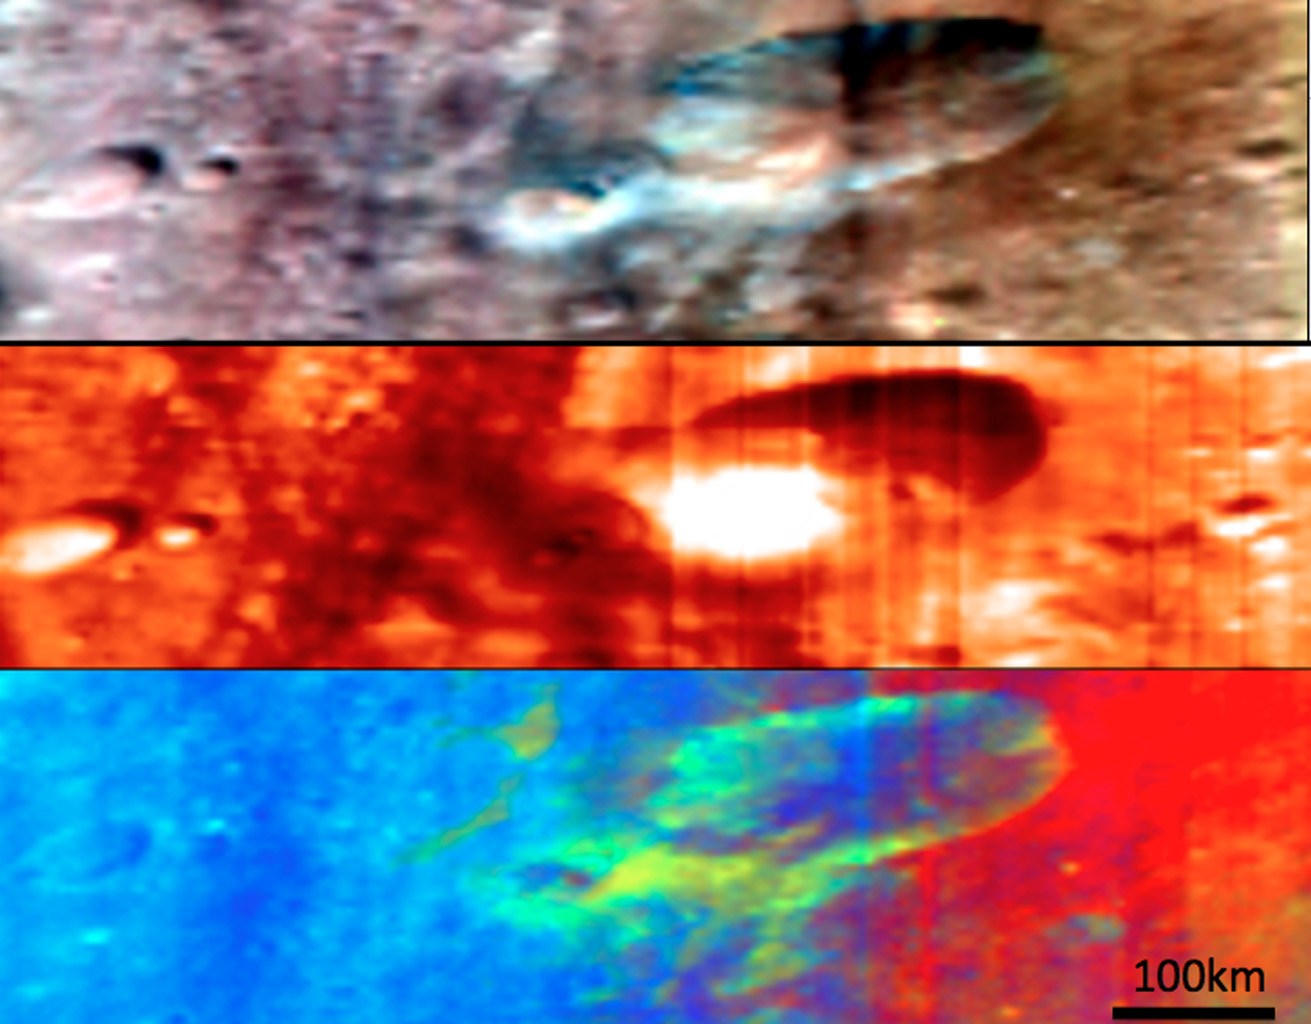 Craters and Ejecta in Visible and Infrared Wavelengths